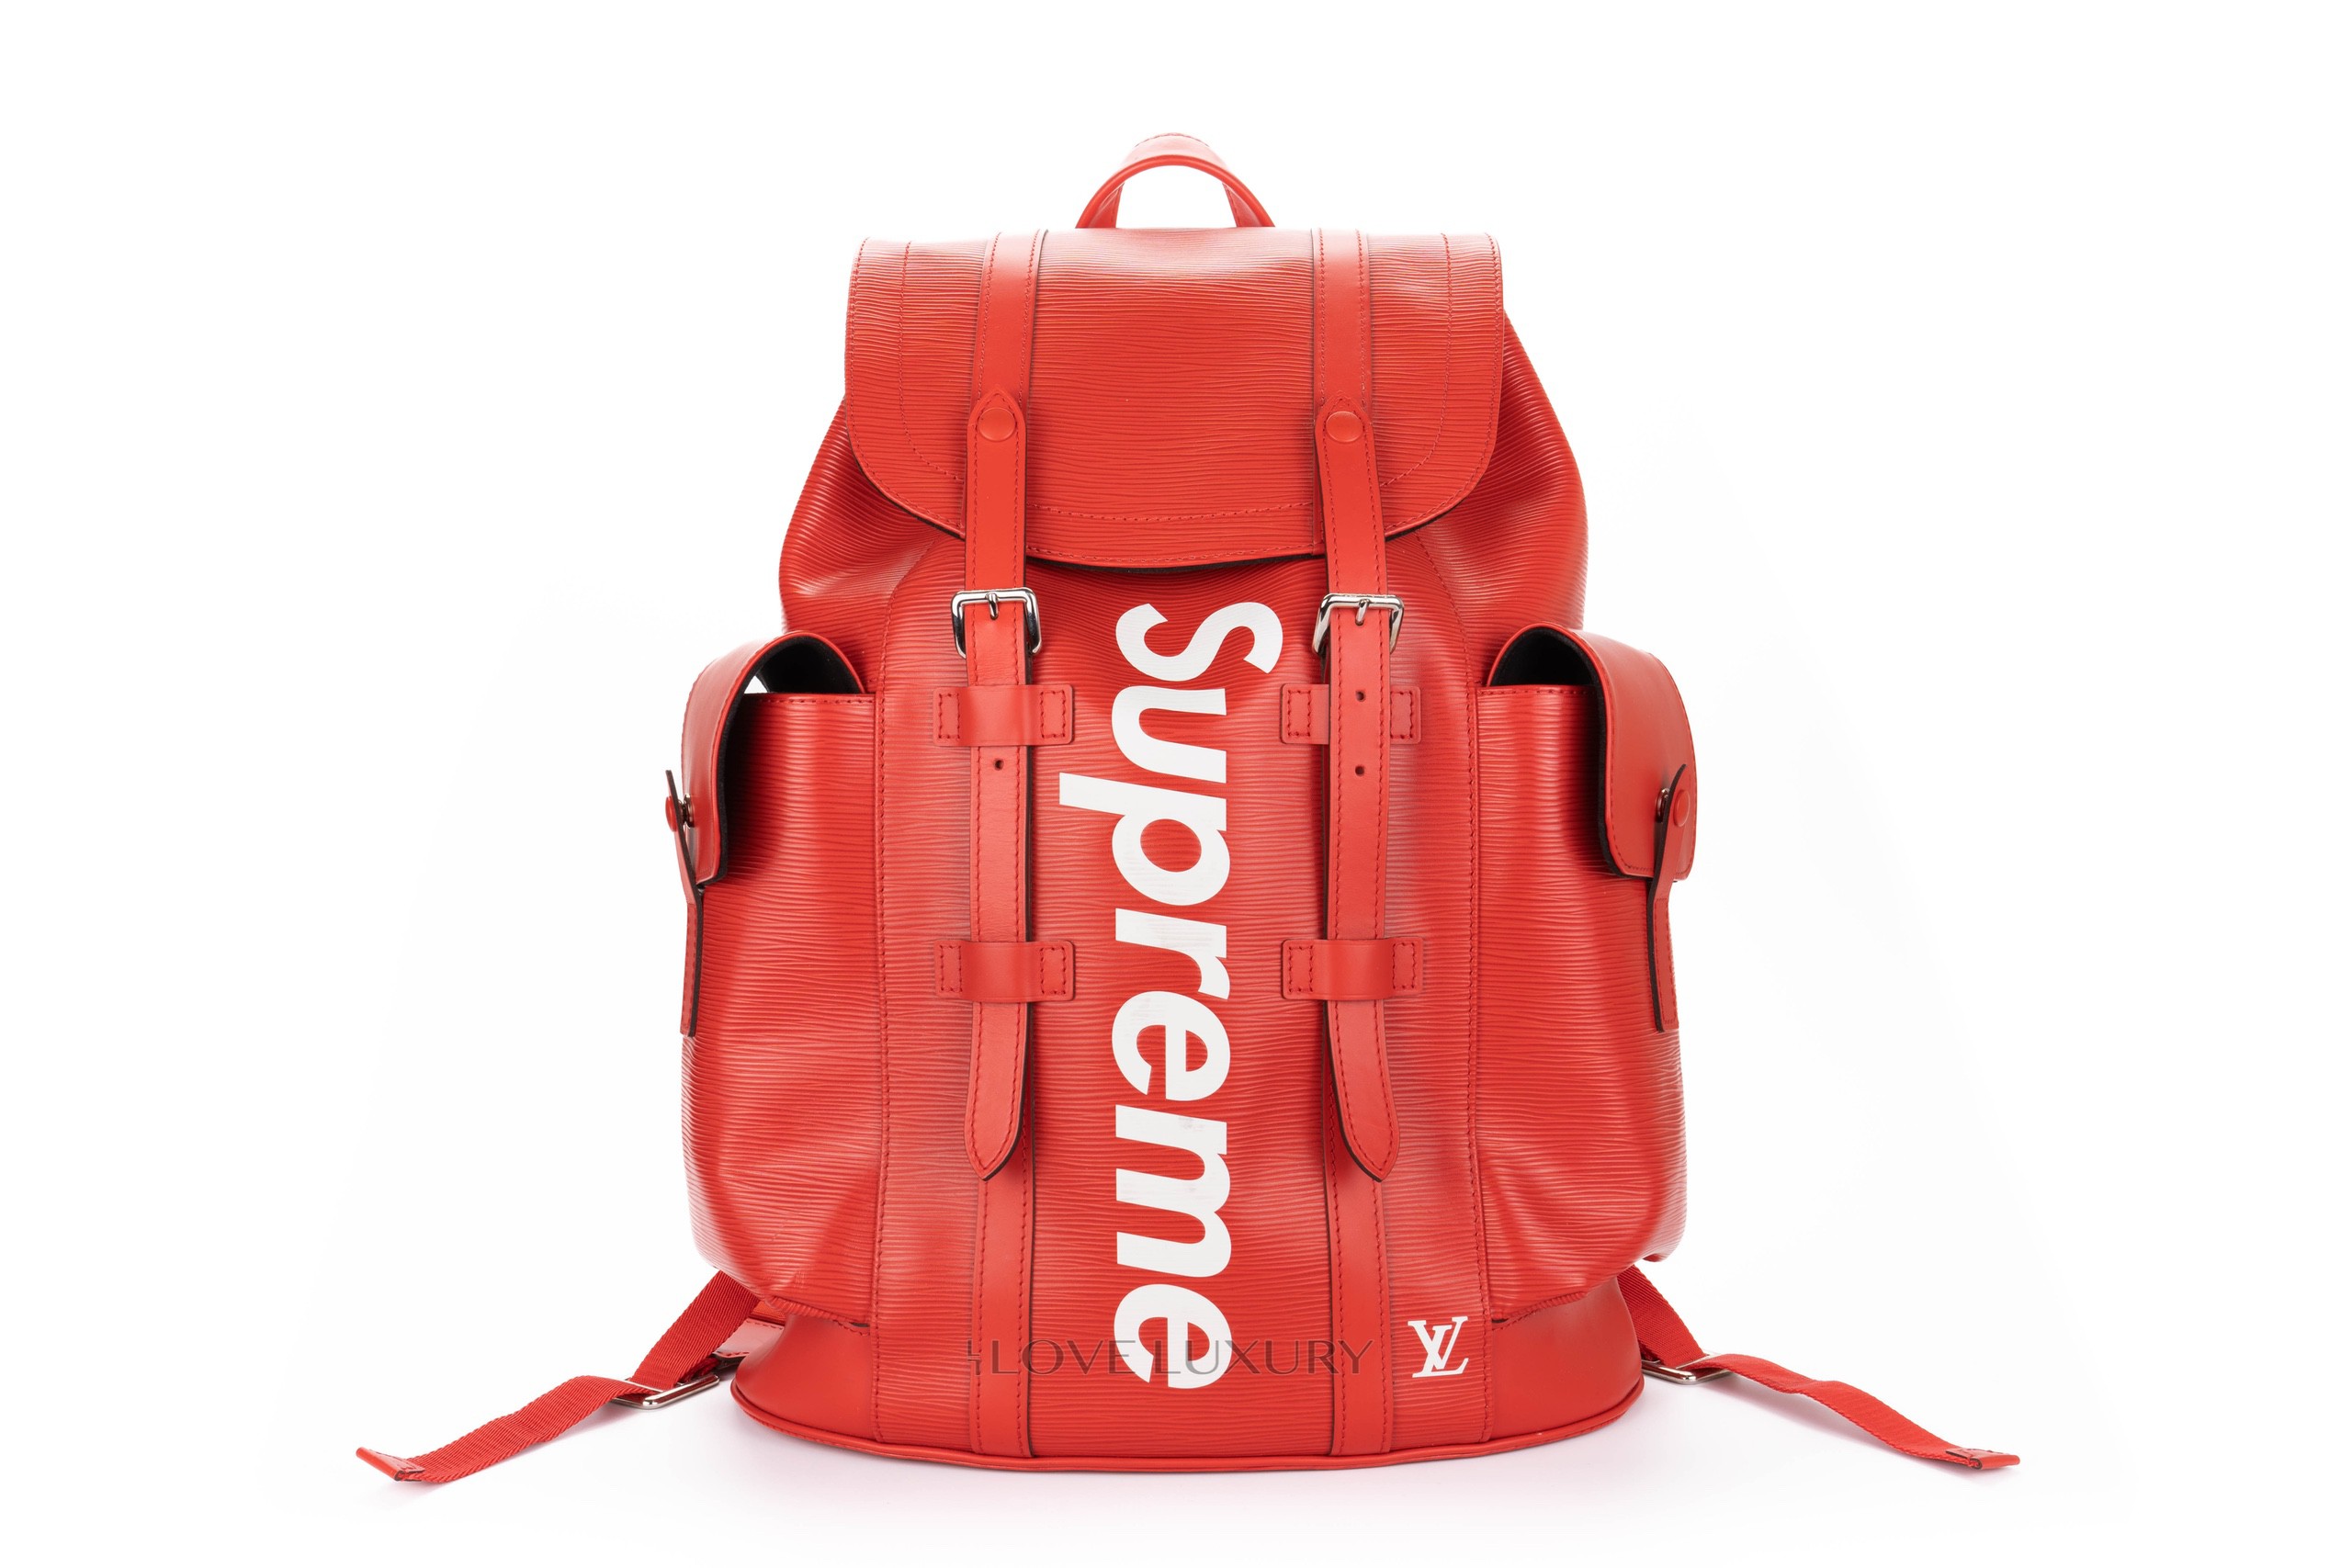 CLEAN LOUIS VUITTON Supreme Epi Christopher PM Backpack Leather Red M53414   eBay